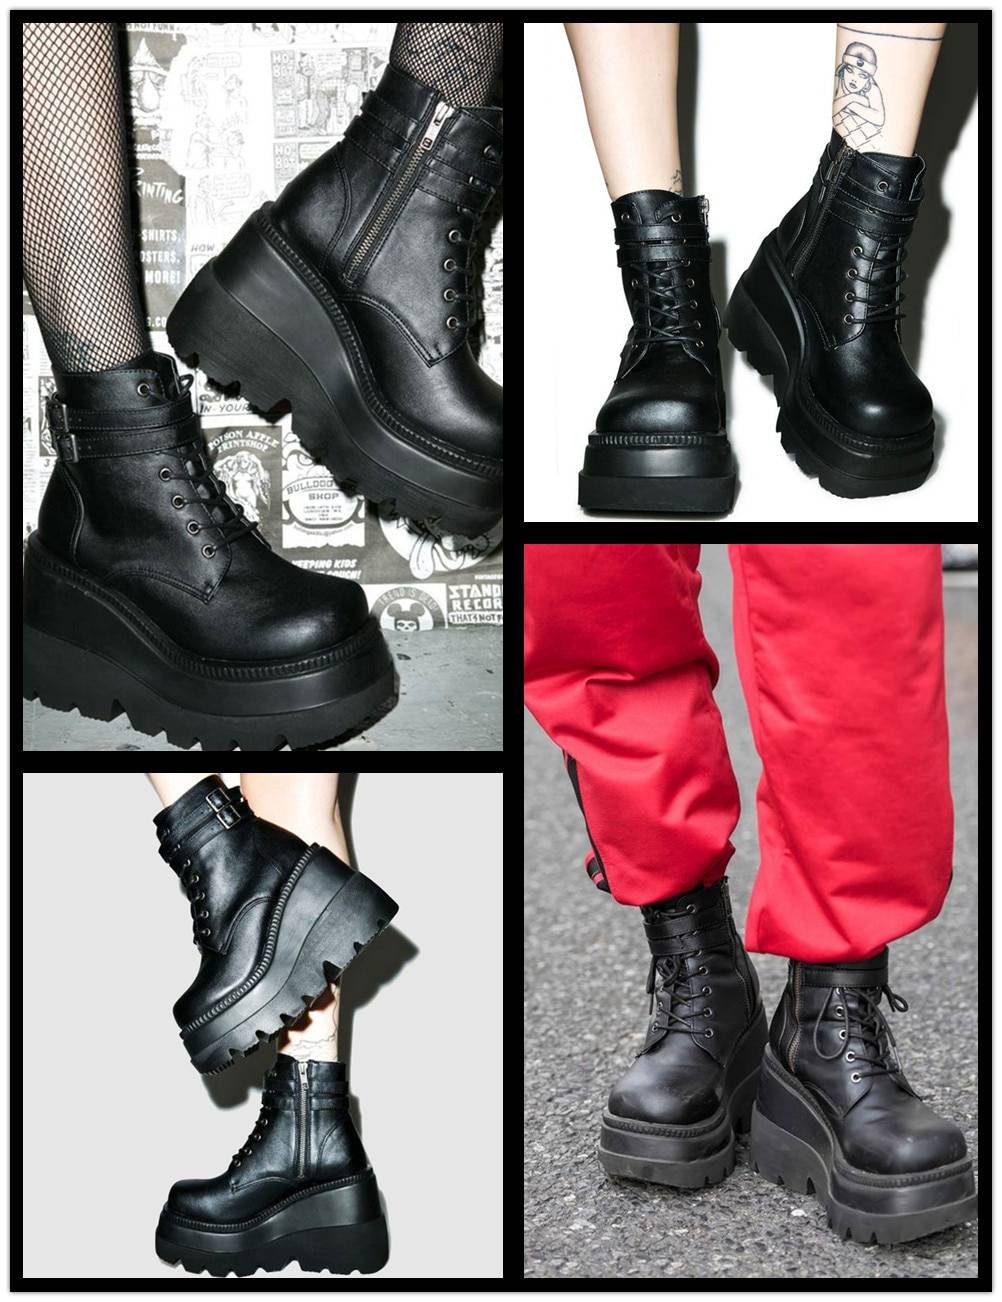 Brand Design 2021 Big sizes 43 Platform High Heels Cosplay Fashionable Autumn Winter Wedges Shoes Ankle Boots Women 5